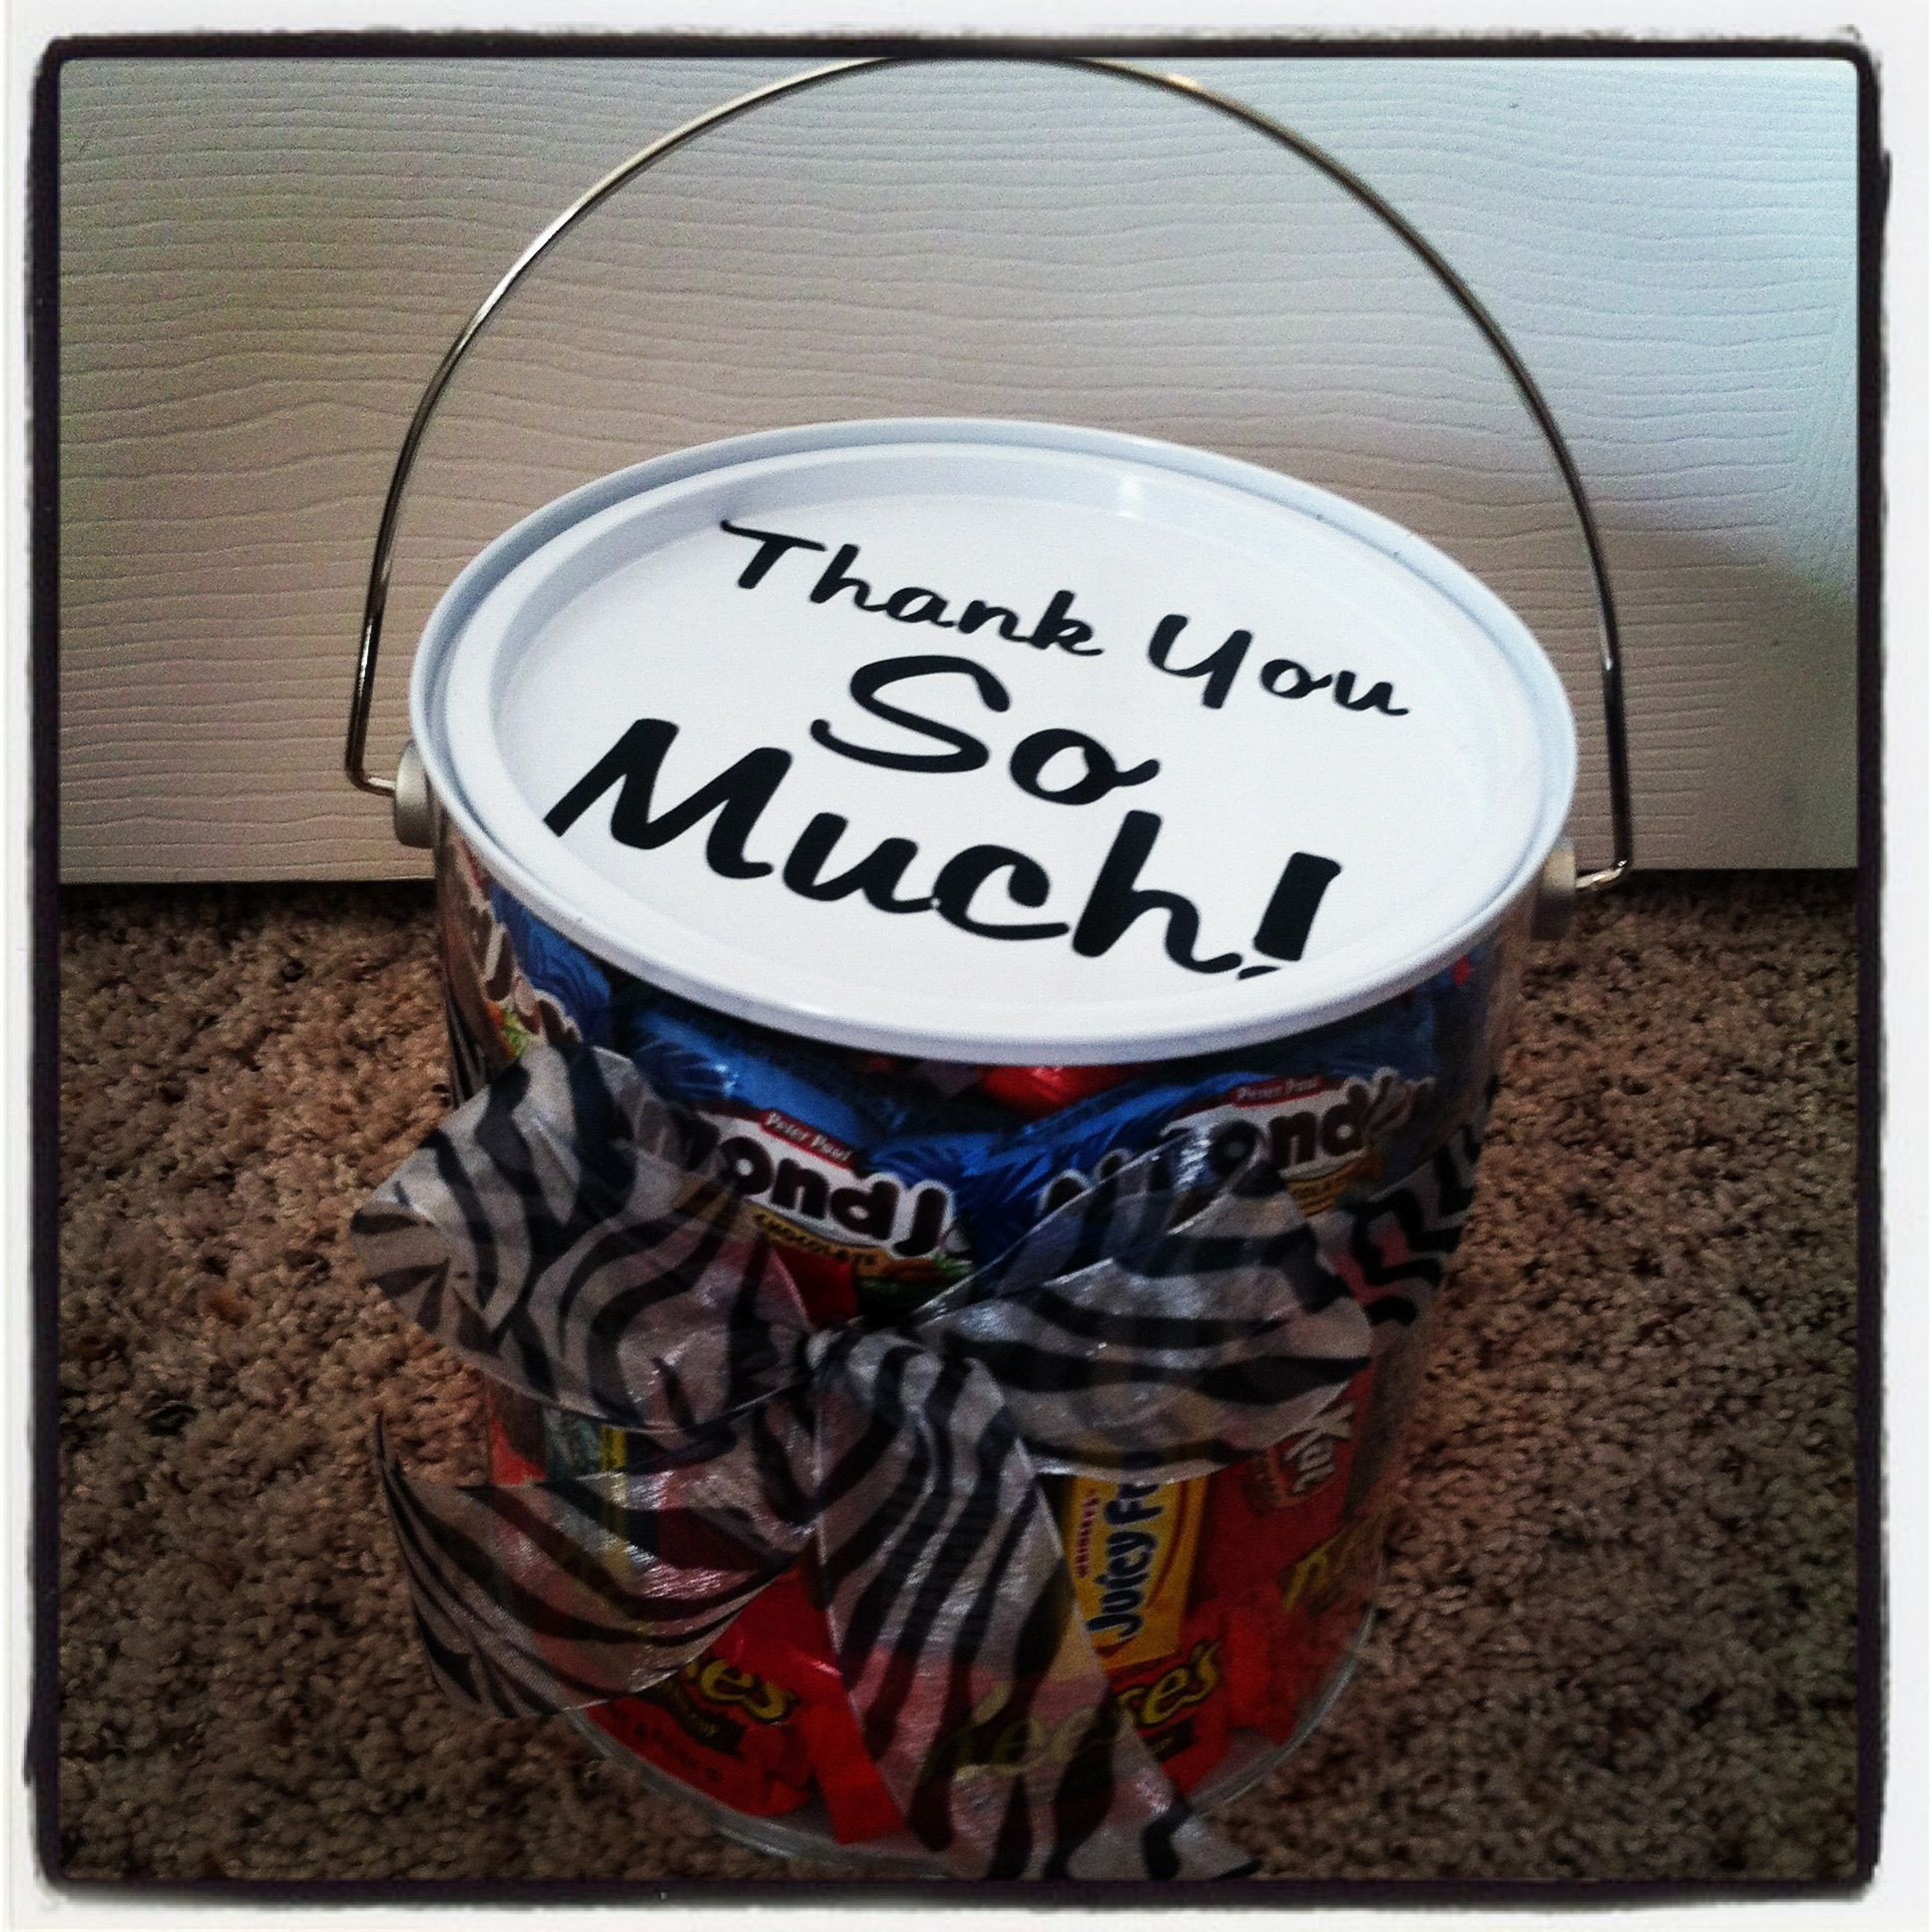 Thank You Gift Ideas For Coworkers Homemade
 "Thank you " Gift for coworkers t ideas